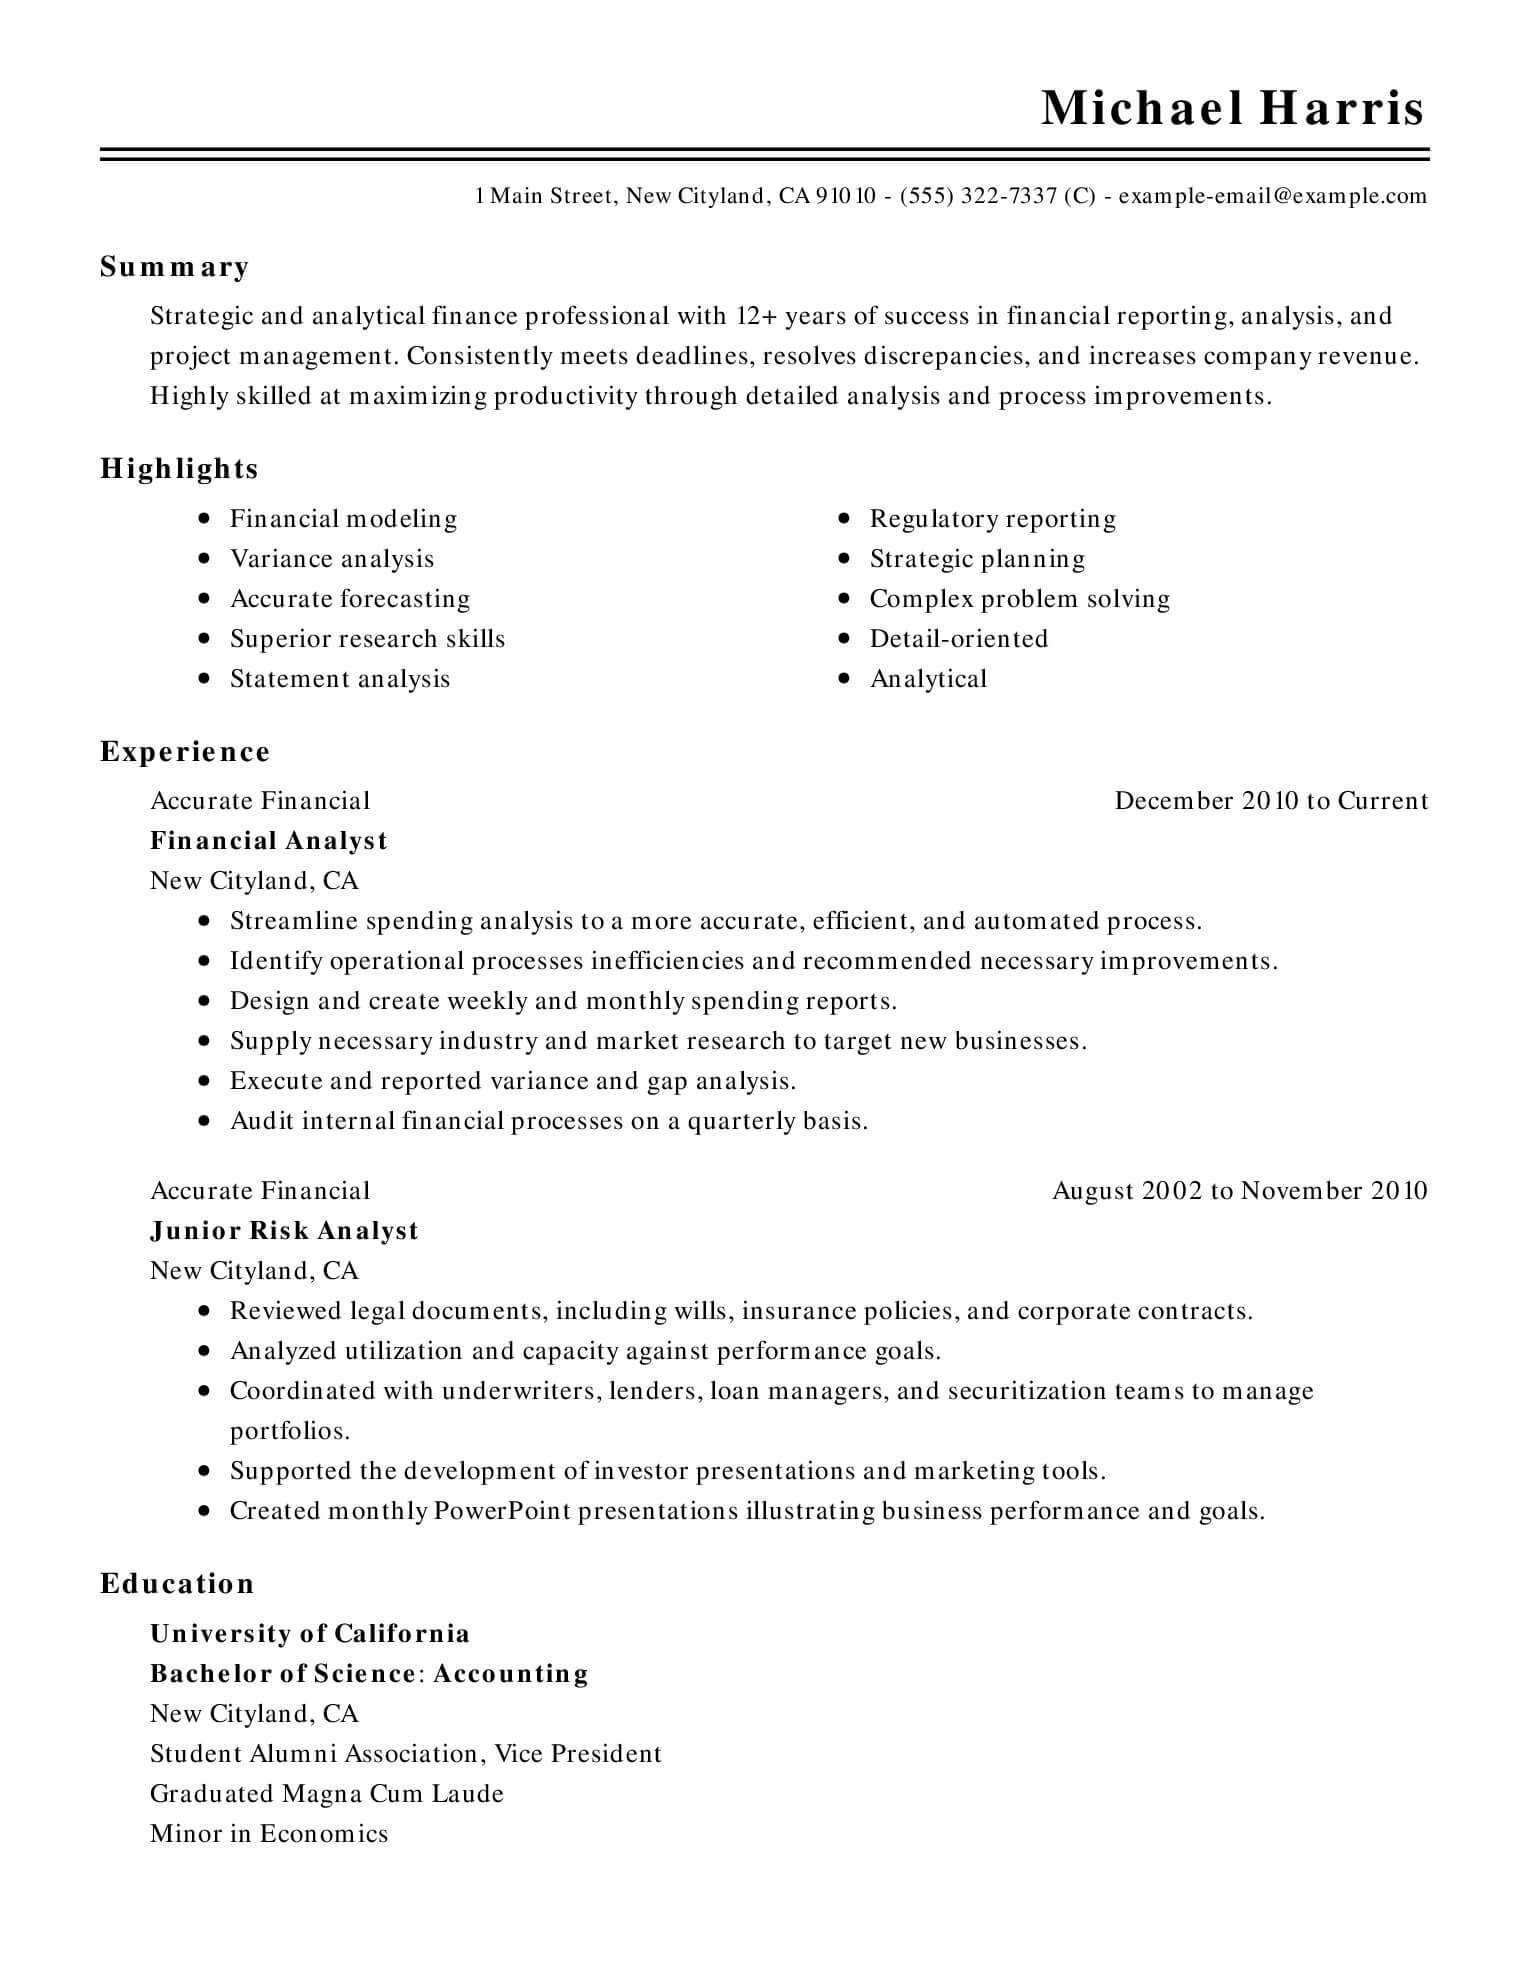 Resume Templates In Word 15 Of the Best Resume Templates for Microsoft Word Fice